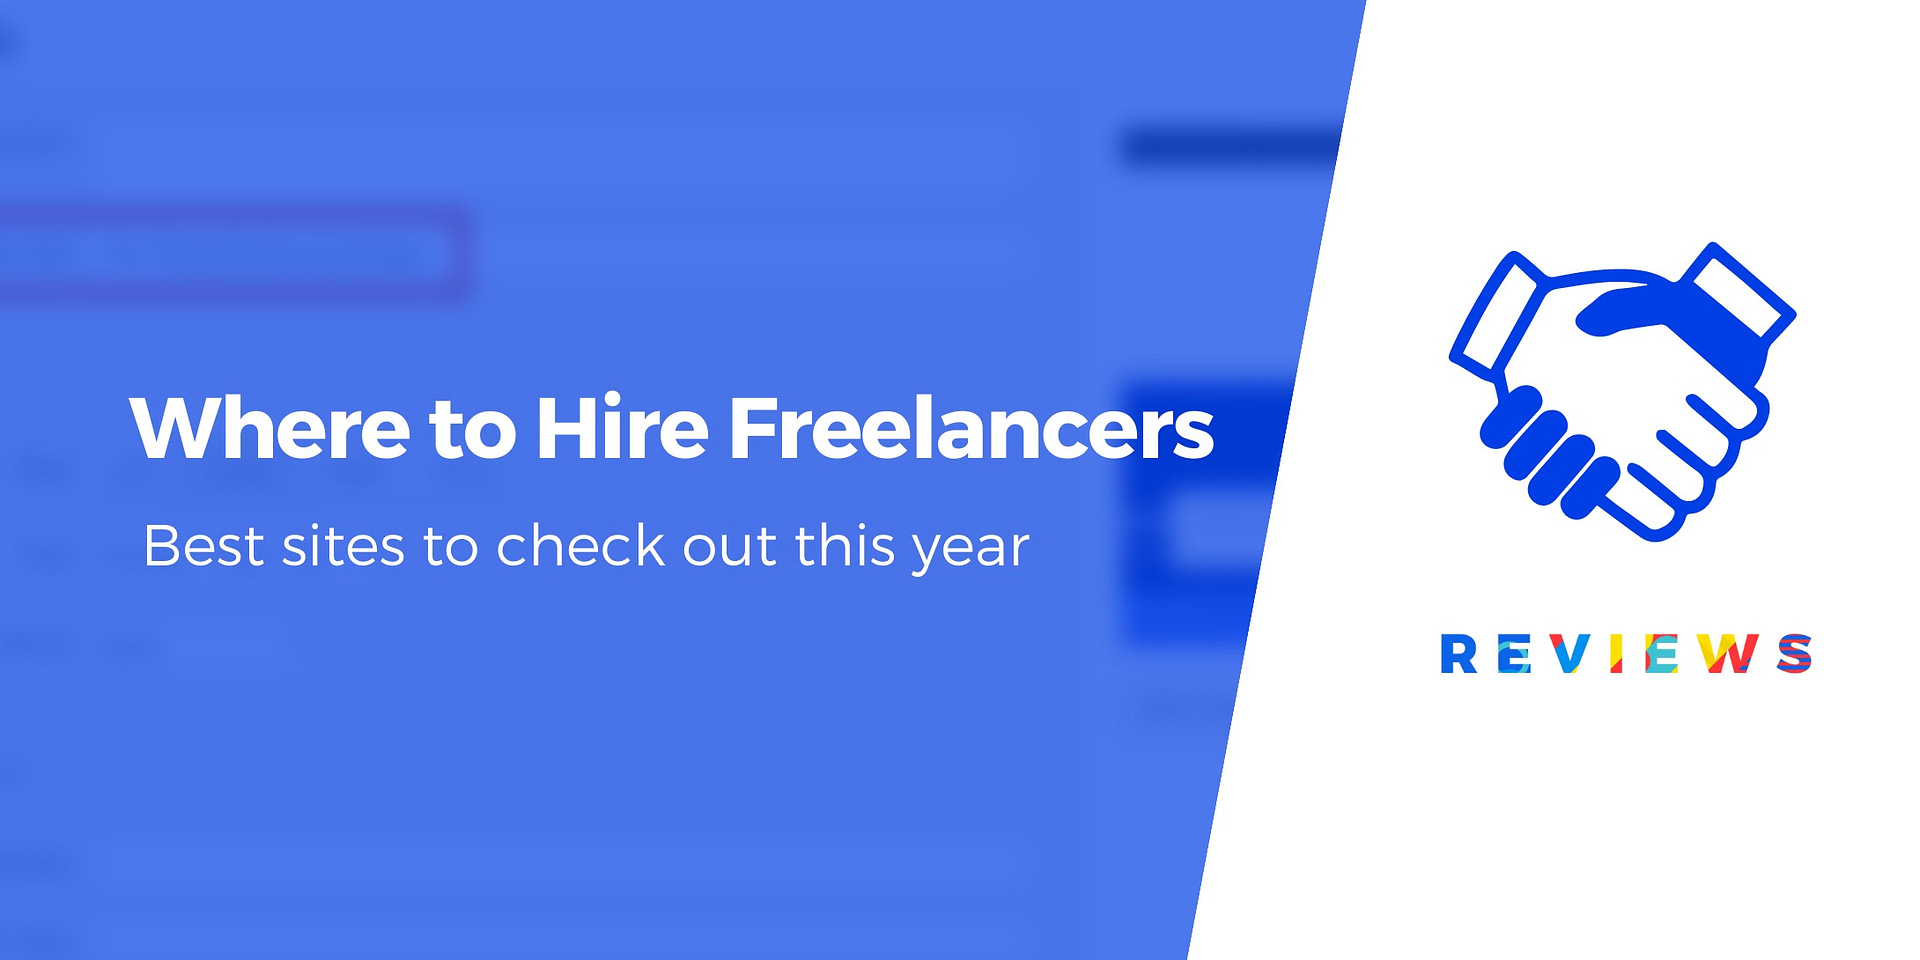 How To Hire Freelancers on Upwork: The Ultimate Guide